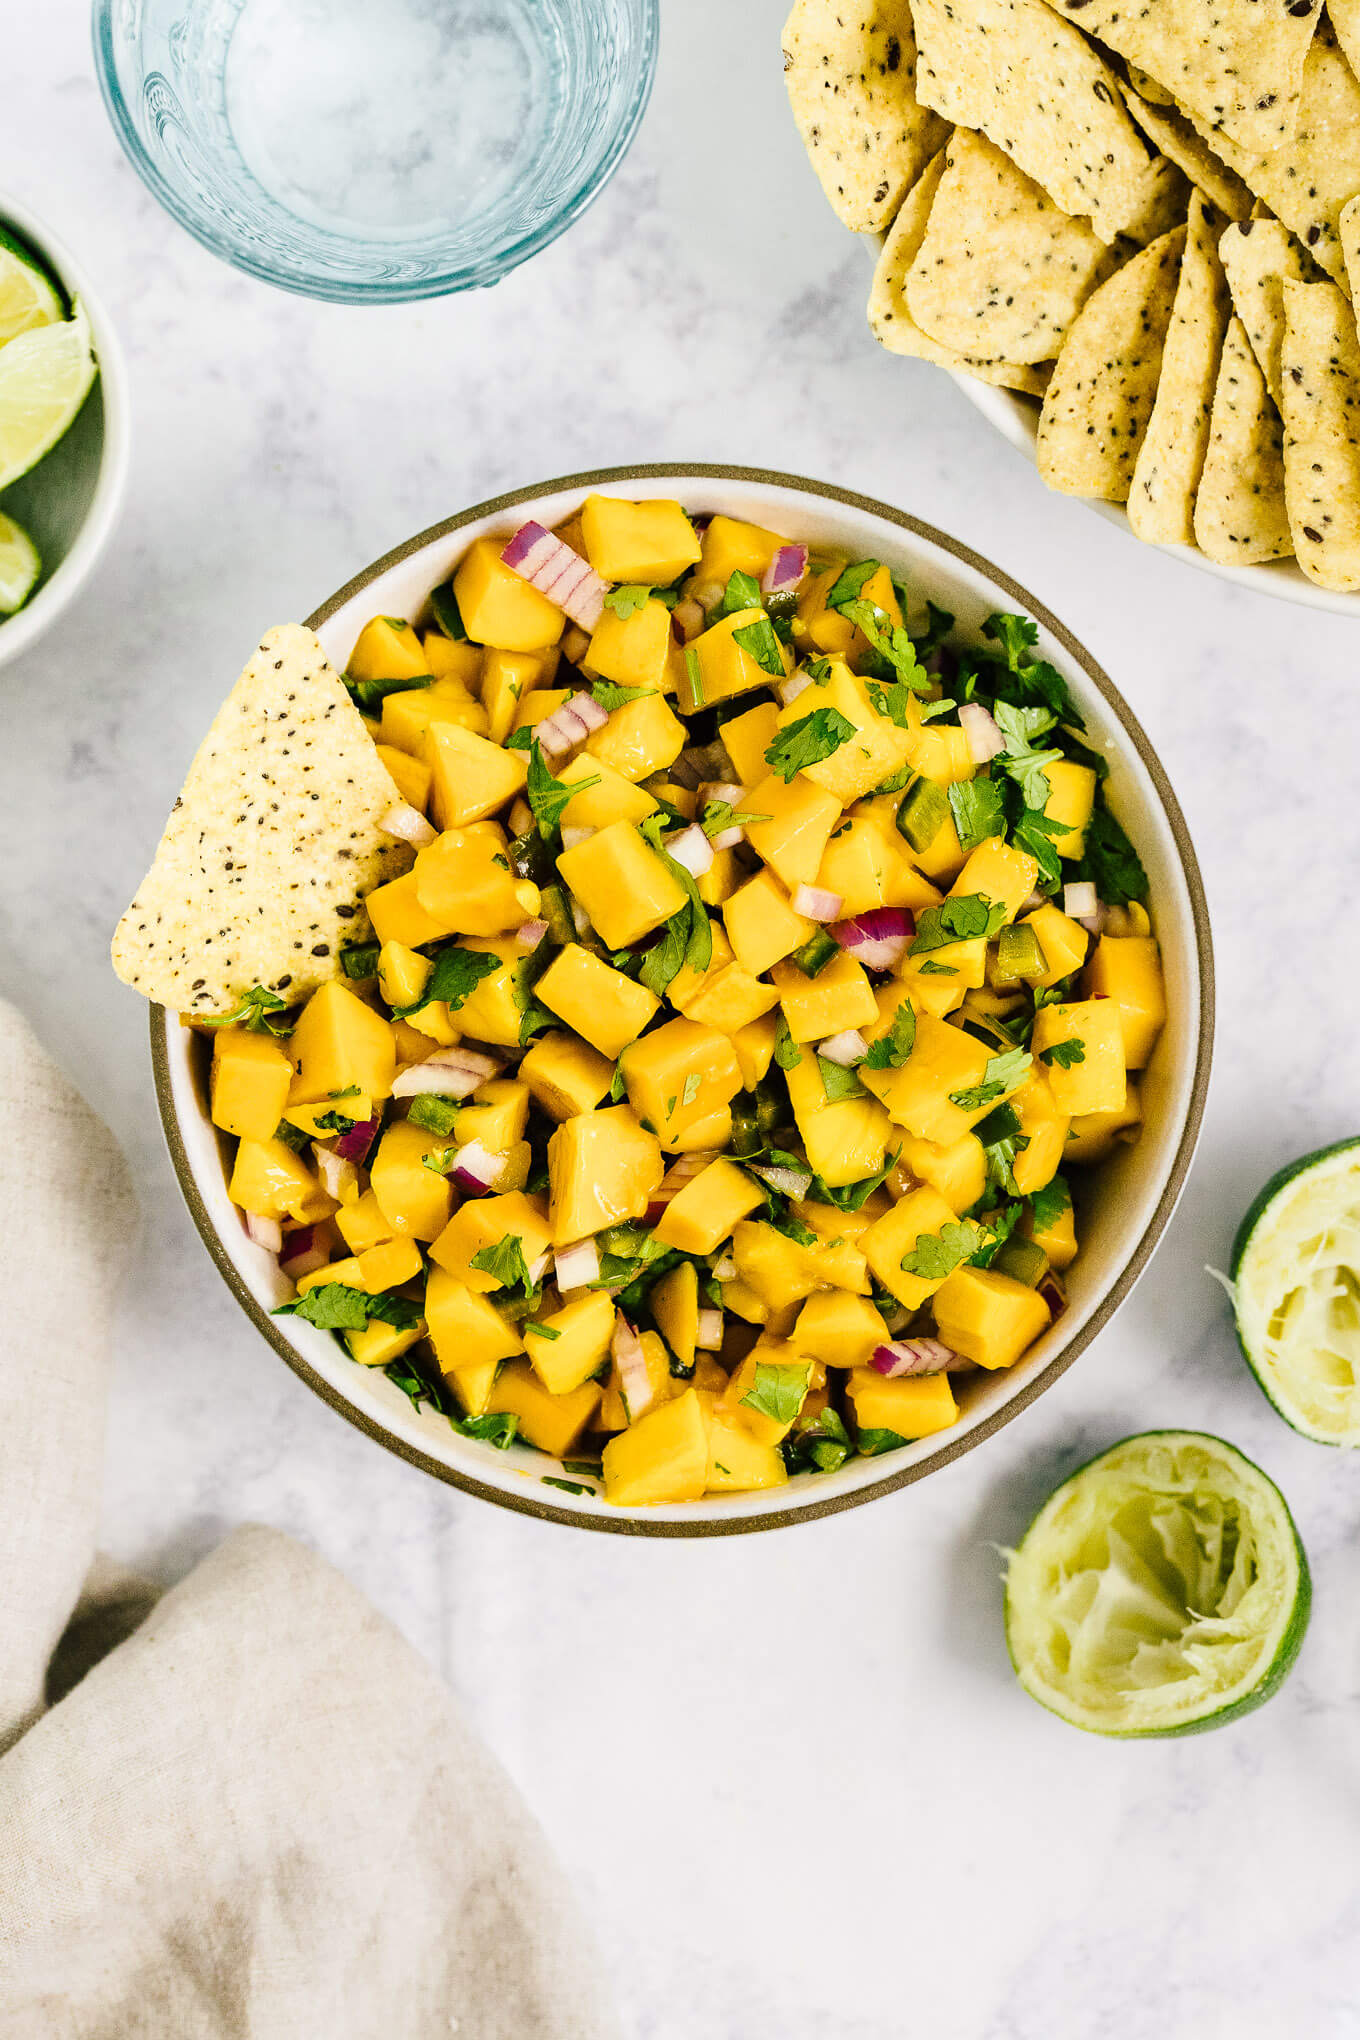 Fresh mango salsa - this 5 ingredient recipe makes for a healthy summer dip.